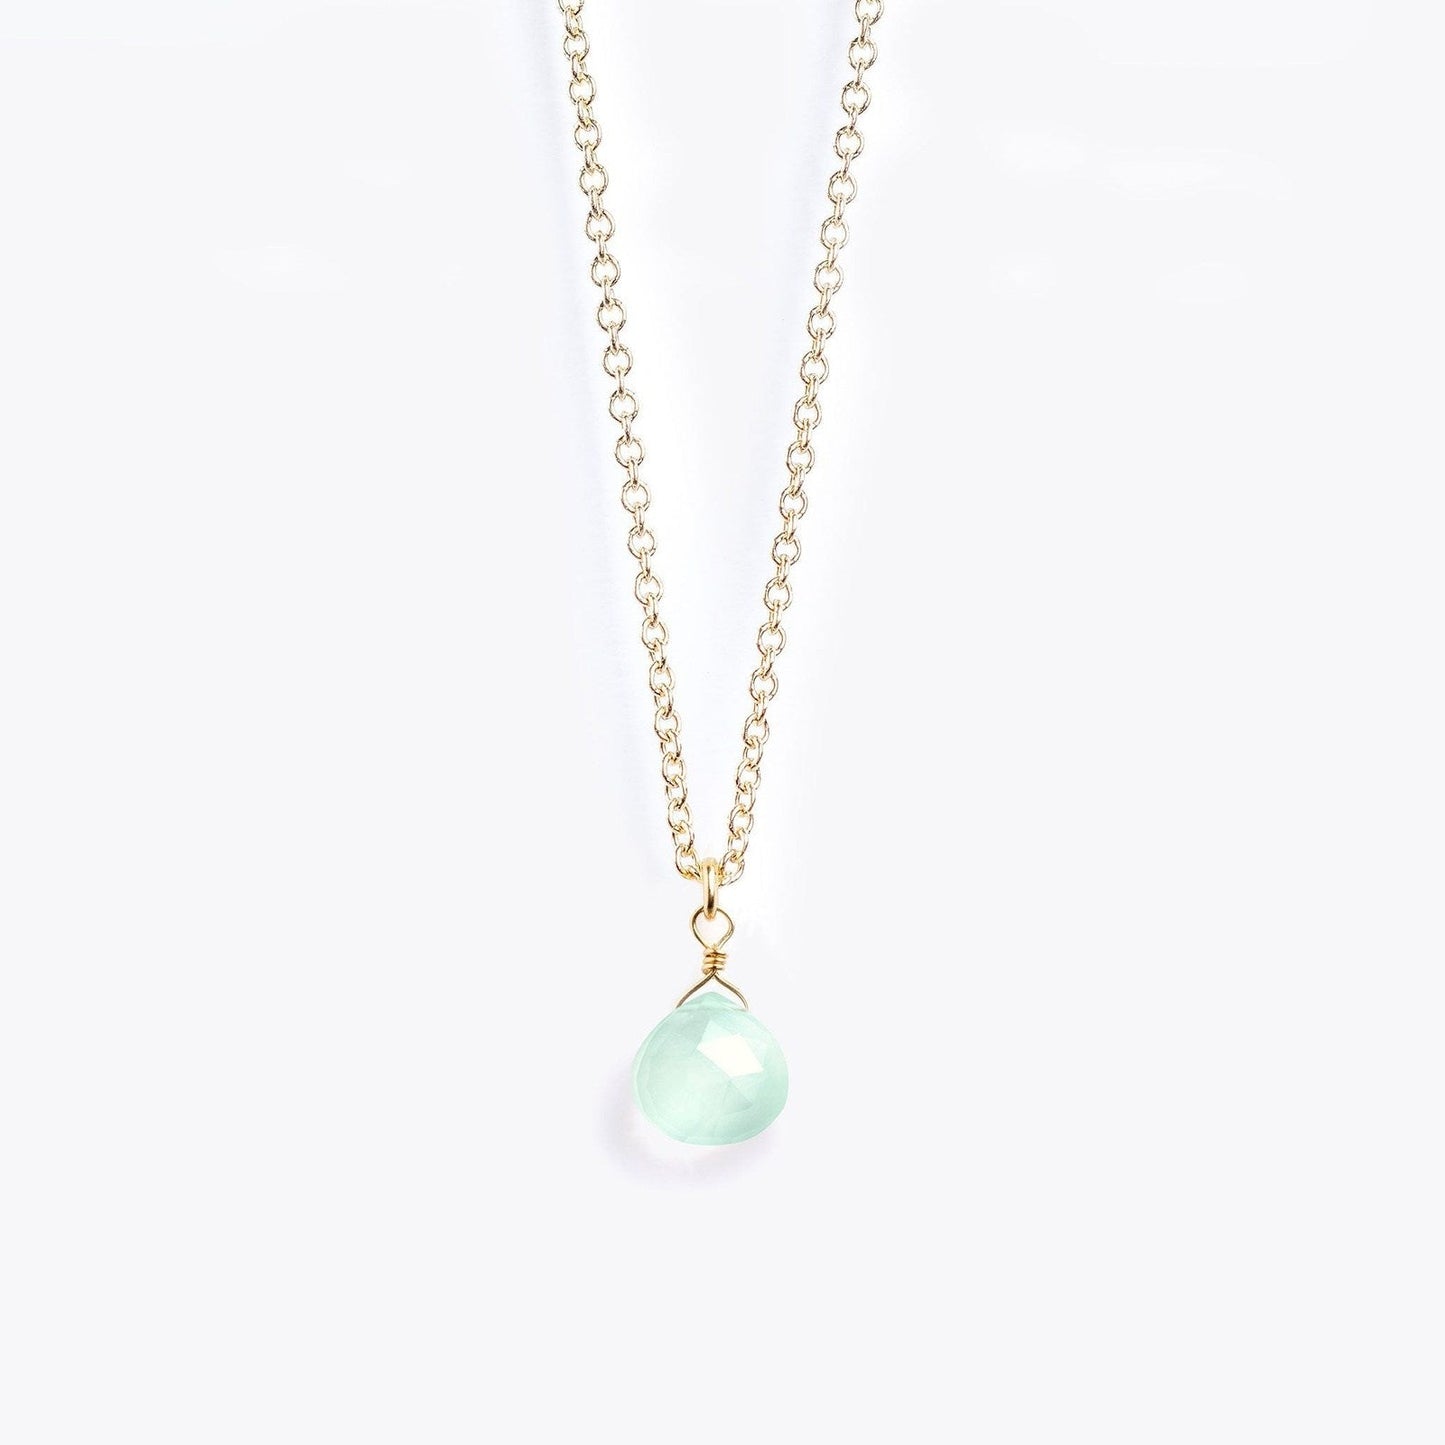 Wanderlust Life Fine Gold Chain Necklace - Sea Glass Chalcedony